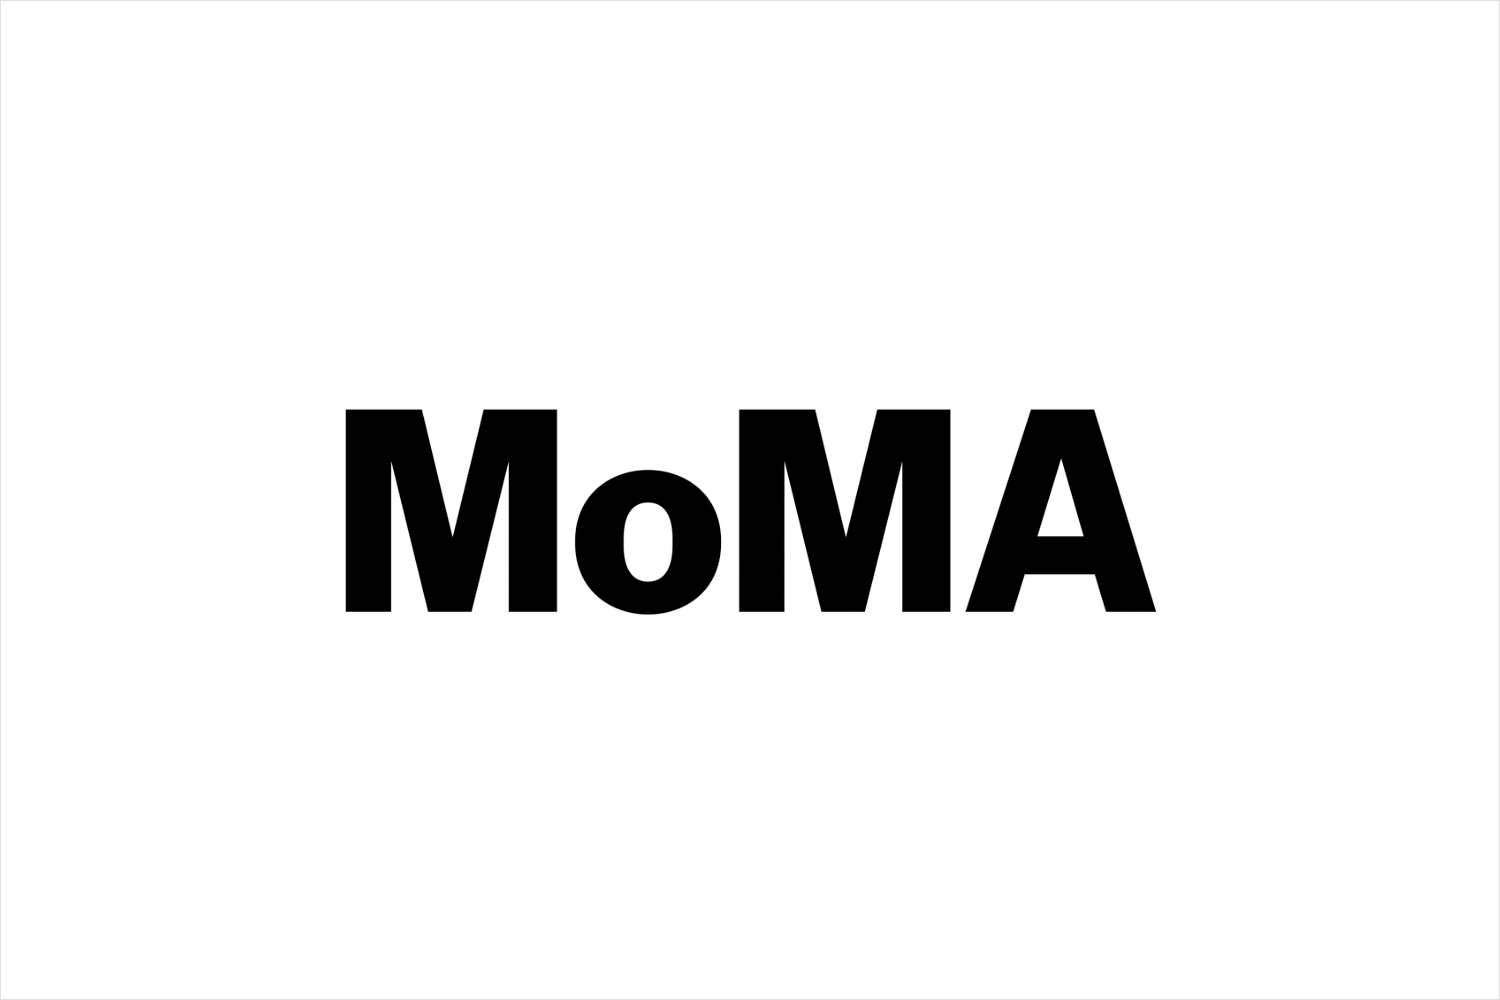 New graphic identity system designed by New York-based Order for MoMA